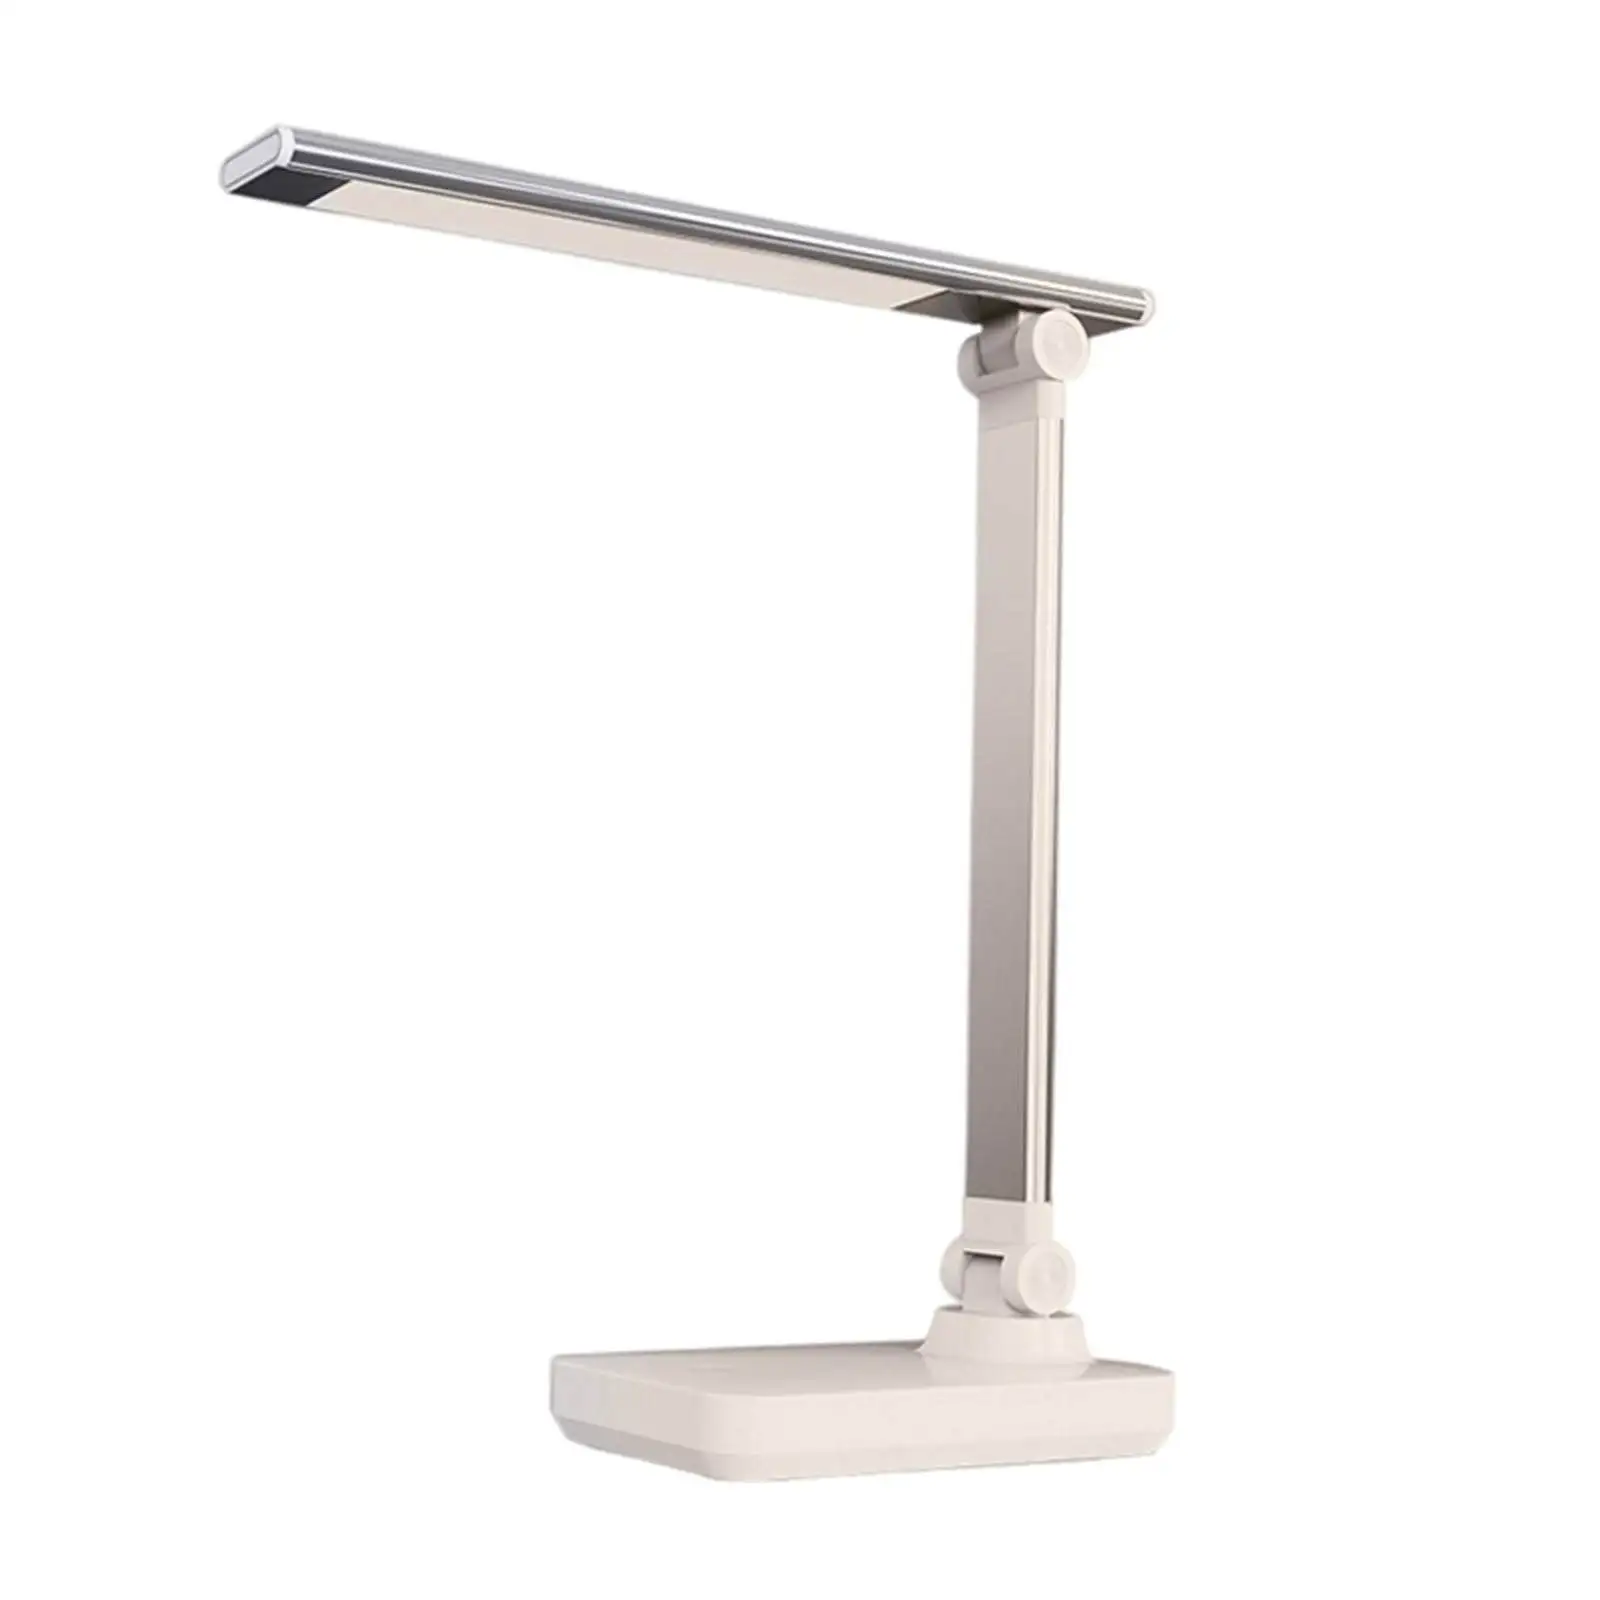 LED Desk Lamp Eye-Caring Dimmable Touch Control Soft Light Three Levels Dimming Warm White Bedside Lamp for Office Computer Work